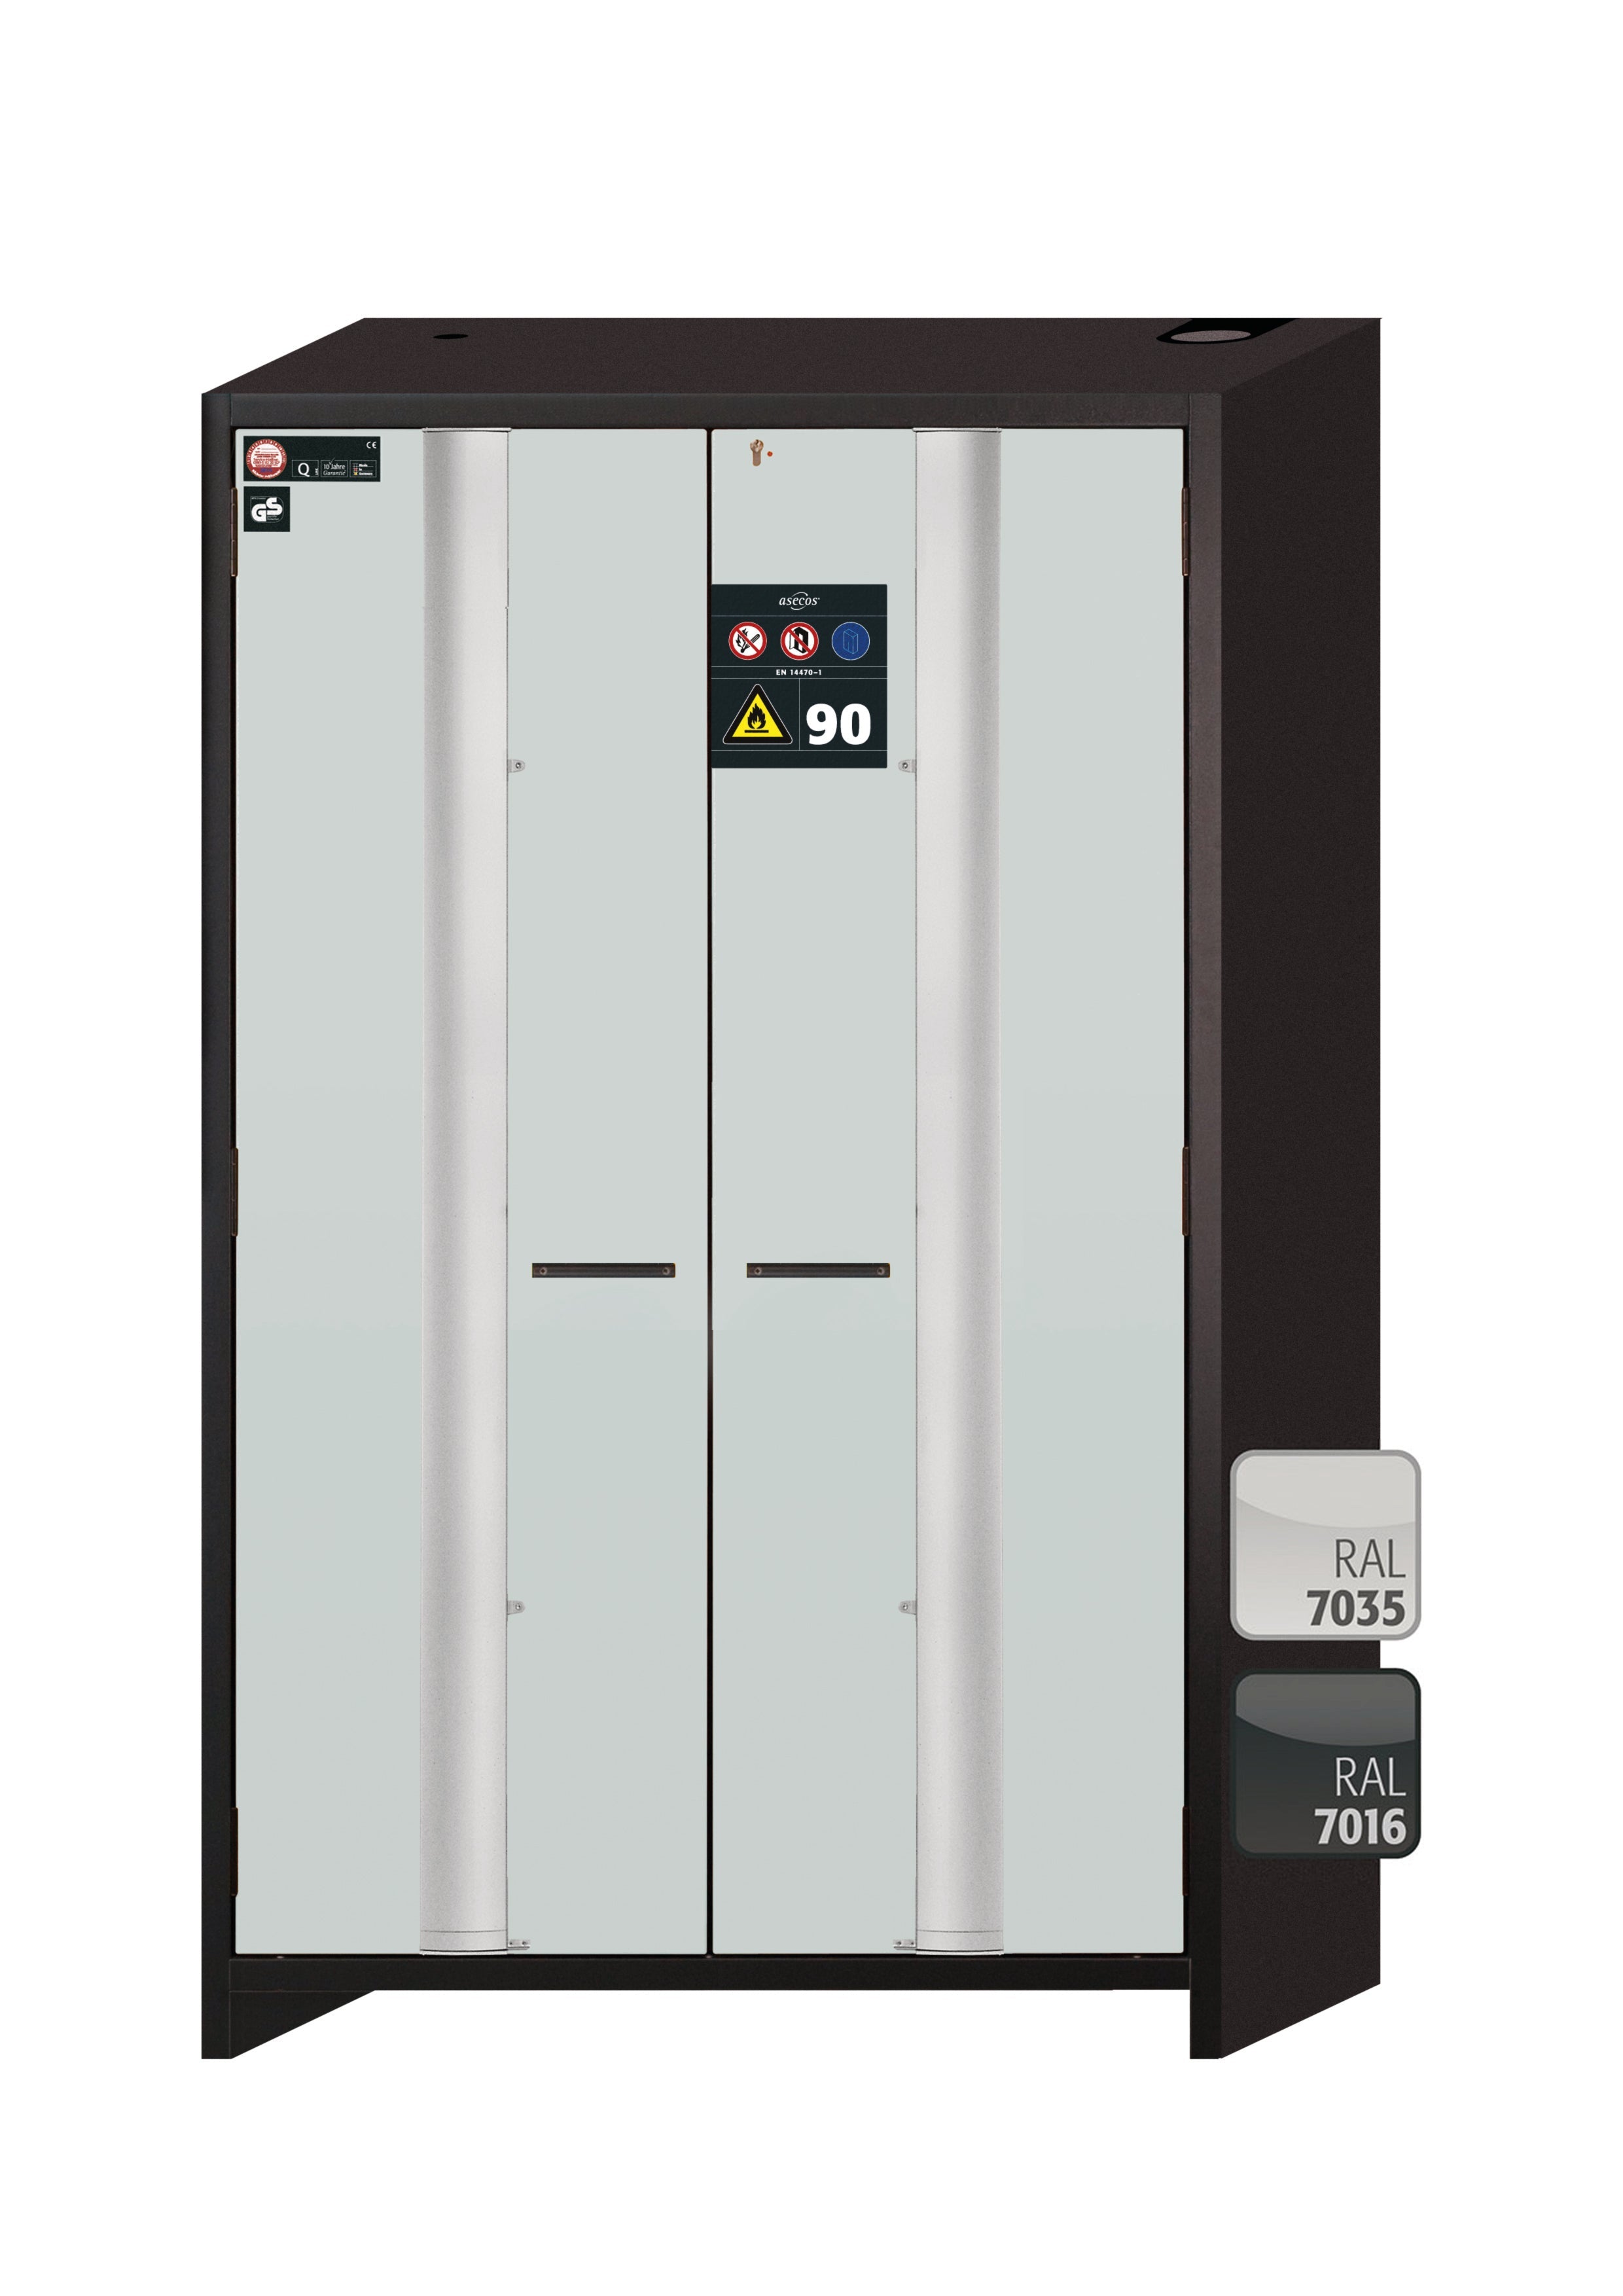 Type 90 safety cabinet Q-PHOENIX-90 model Q90.195.120.FD in light gray RAL 7035 with 4x standard pull-out tray (stainless steel 1.4301)